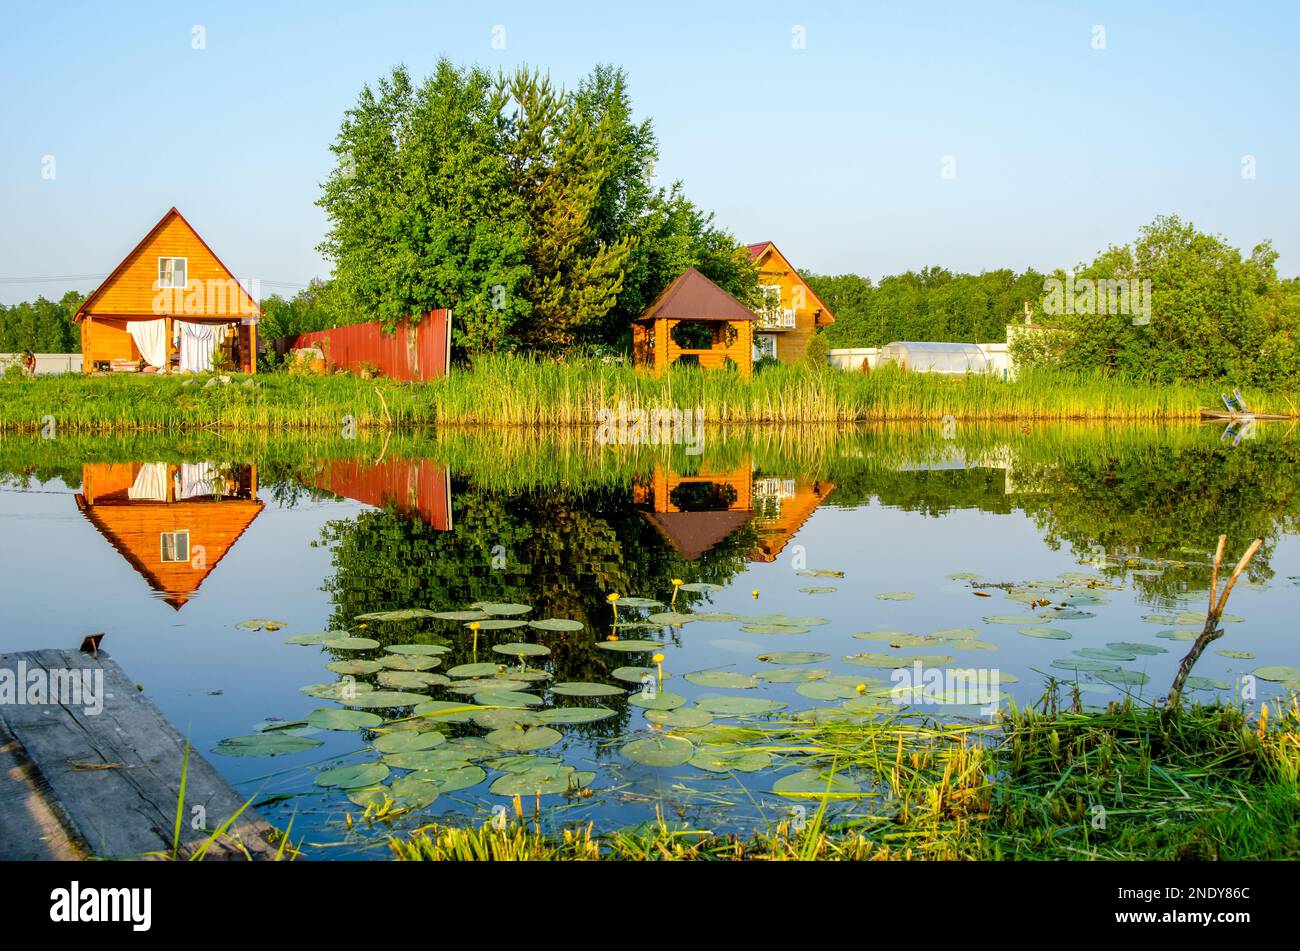 A small pier made of boards in the garden by the pond among grass and water lily flowers against the backdrop of wooden cottages during the day. Stock Photo